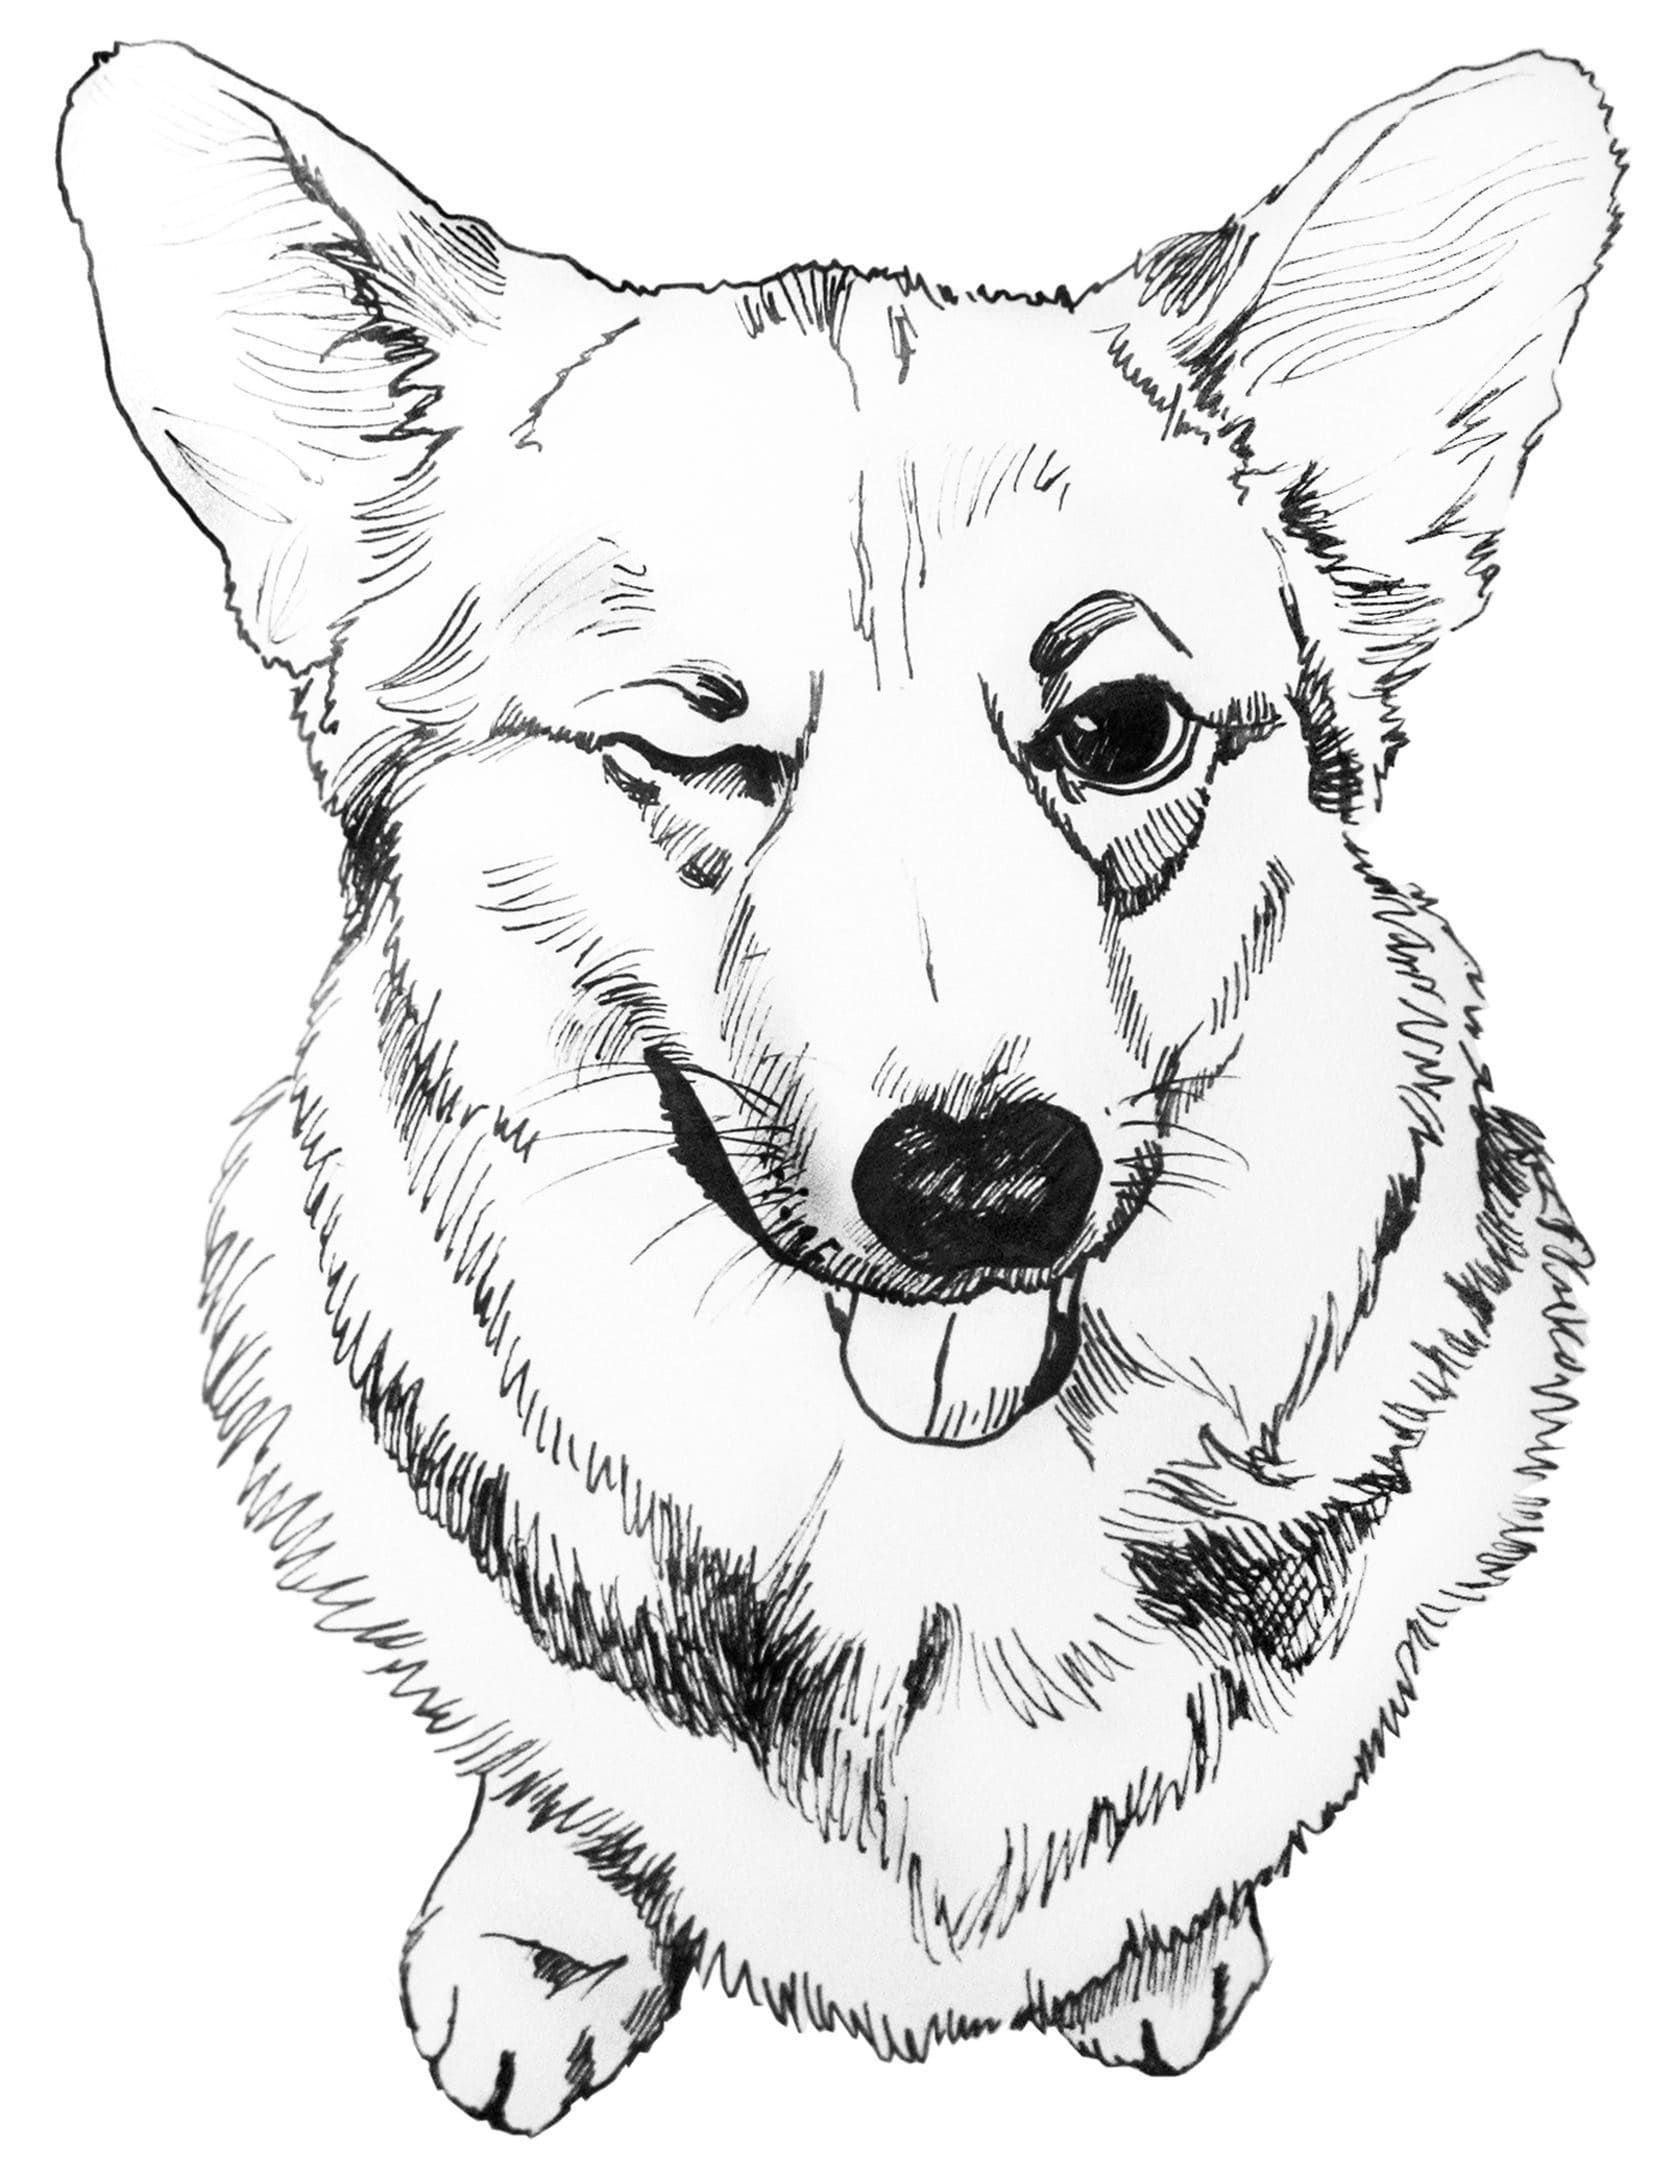 Corgi Coloring Pages | 90 Pictures Free Printable